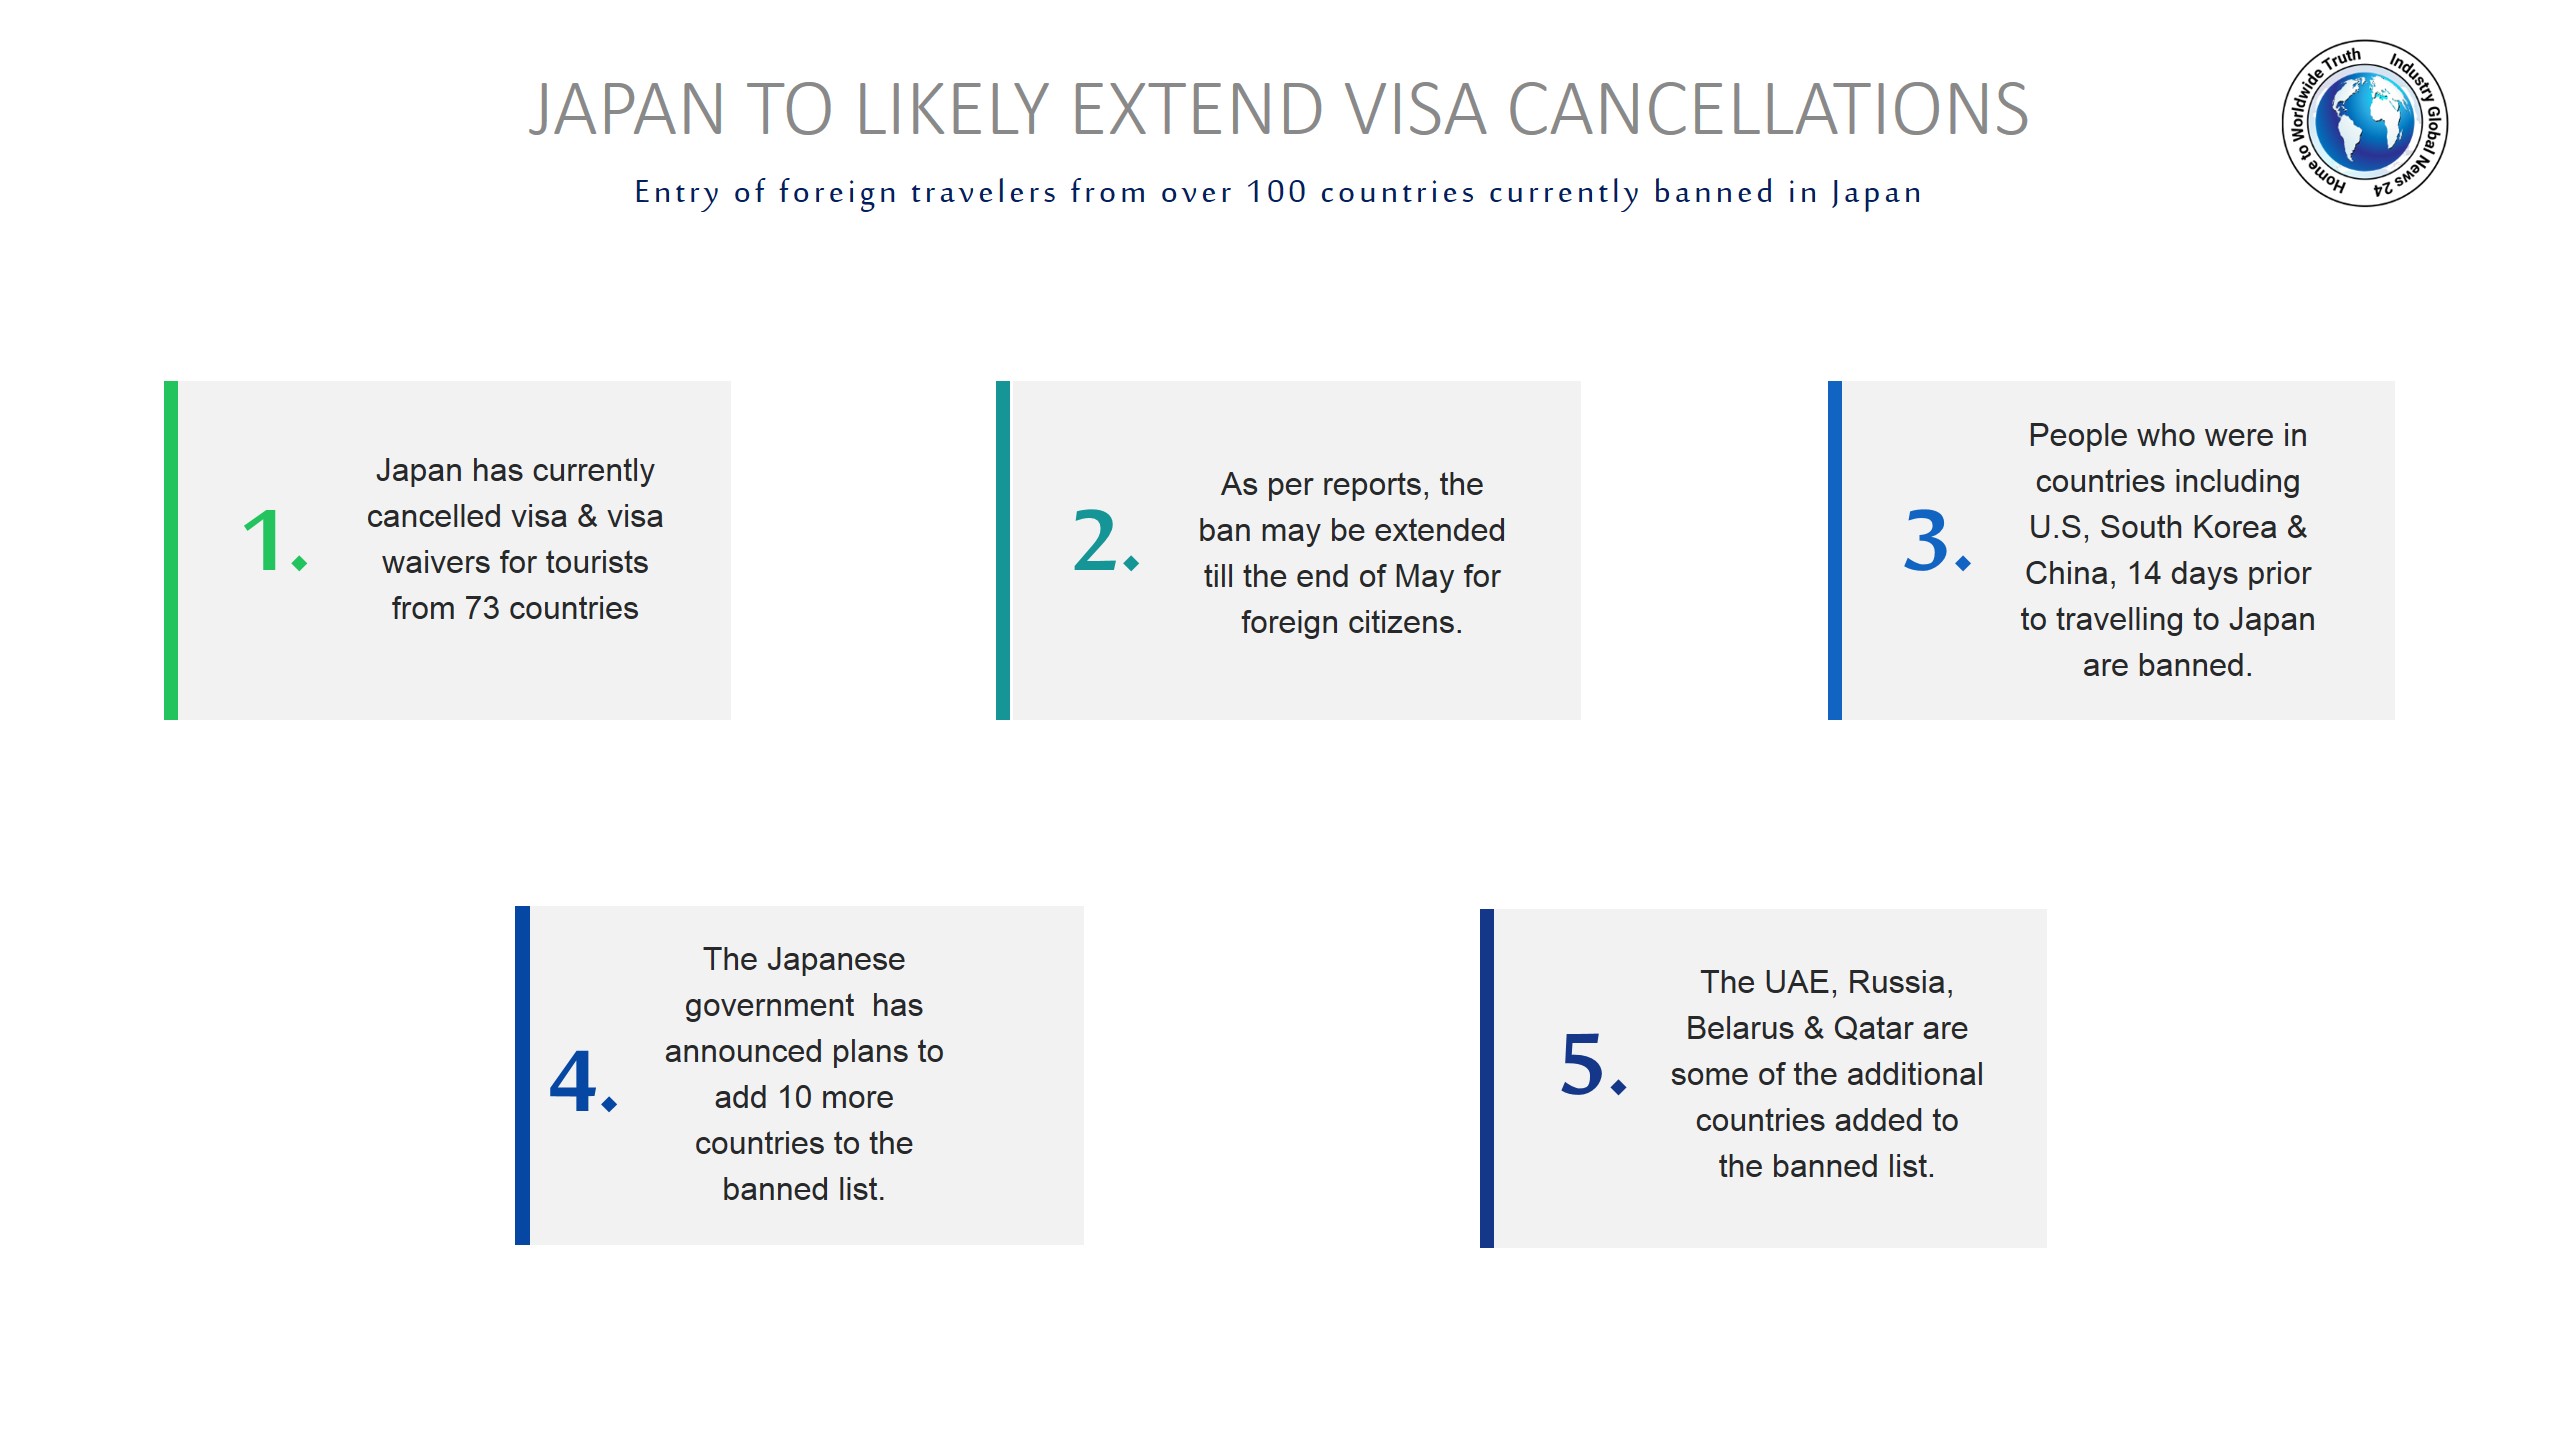 Japan to likely extend visa cancellations